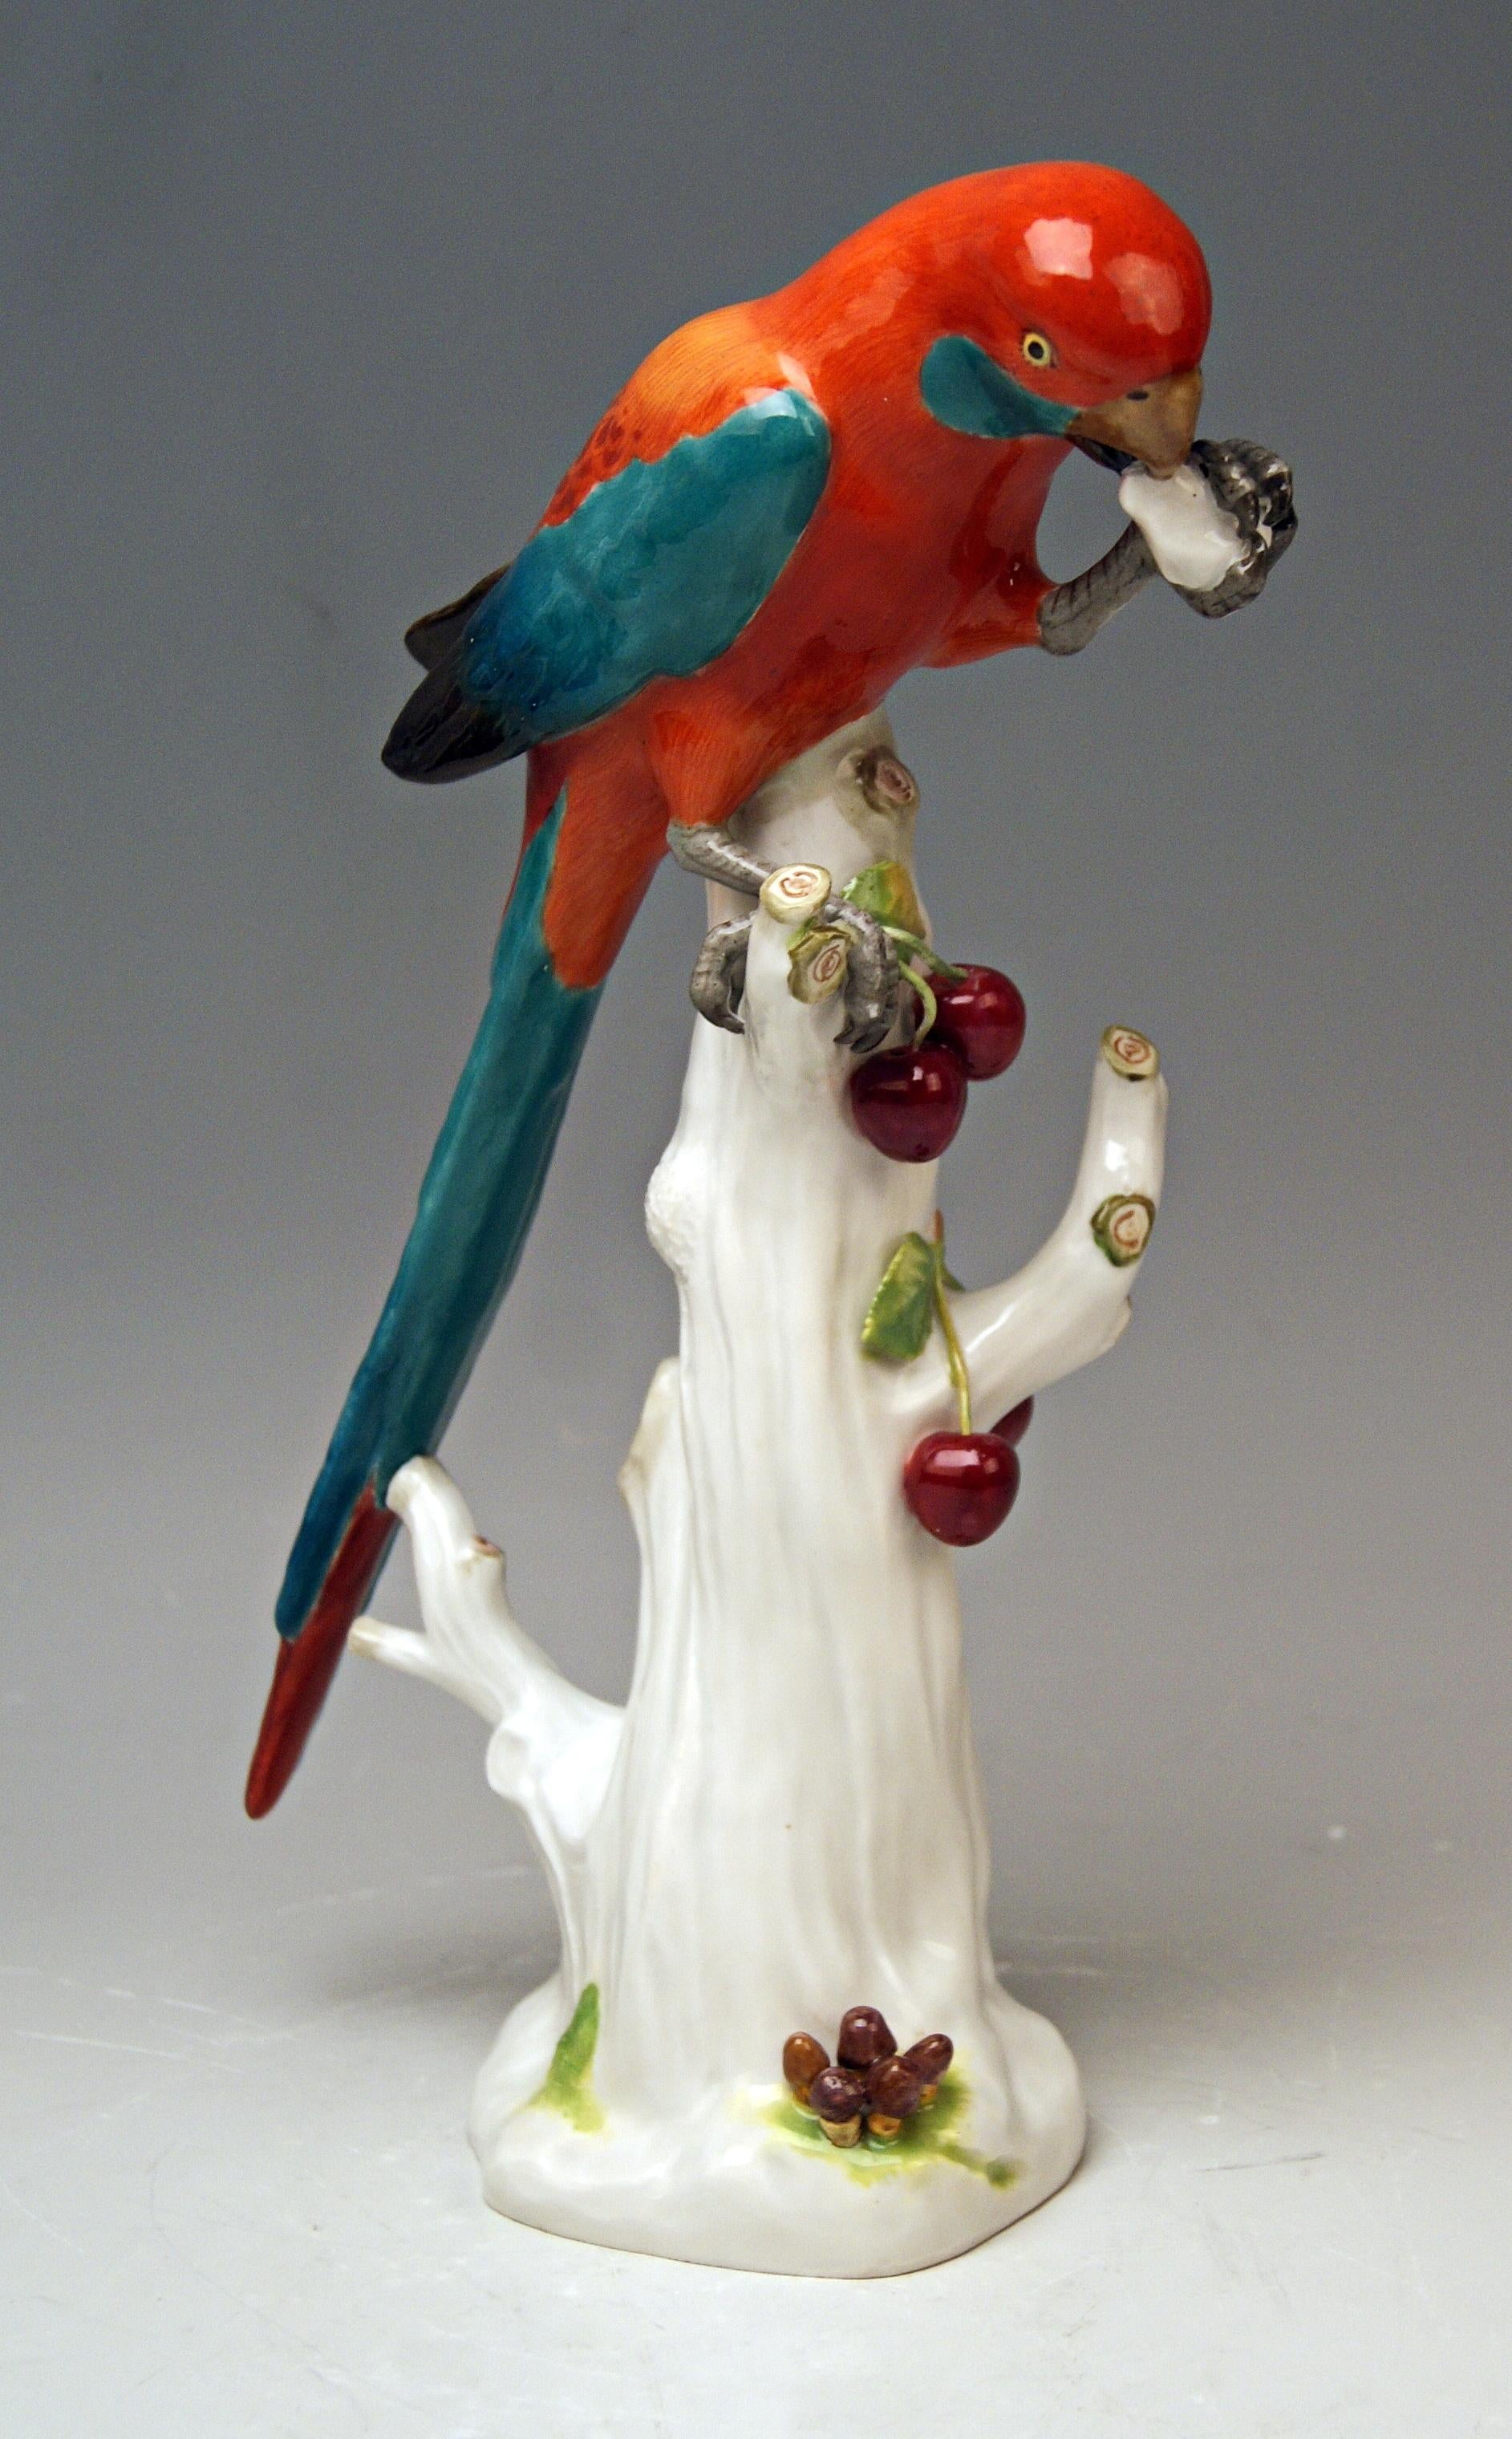 Animal figurine: Parrot situated on a tree's stump with cherries

Manufactory: Meissen
Hallmarked: Blue Meissen sword mark with pommels on hilts (underglazed)
model number 20x / painter's number 72 / former's number 6
First quality
Dating: